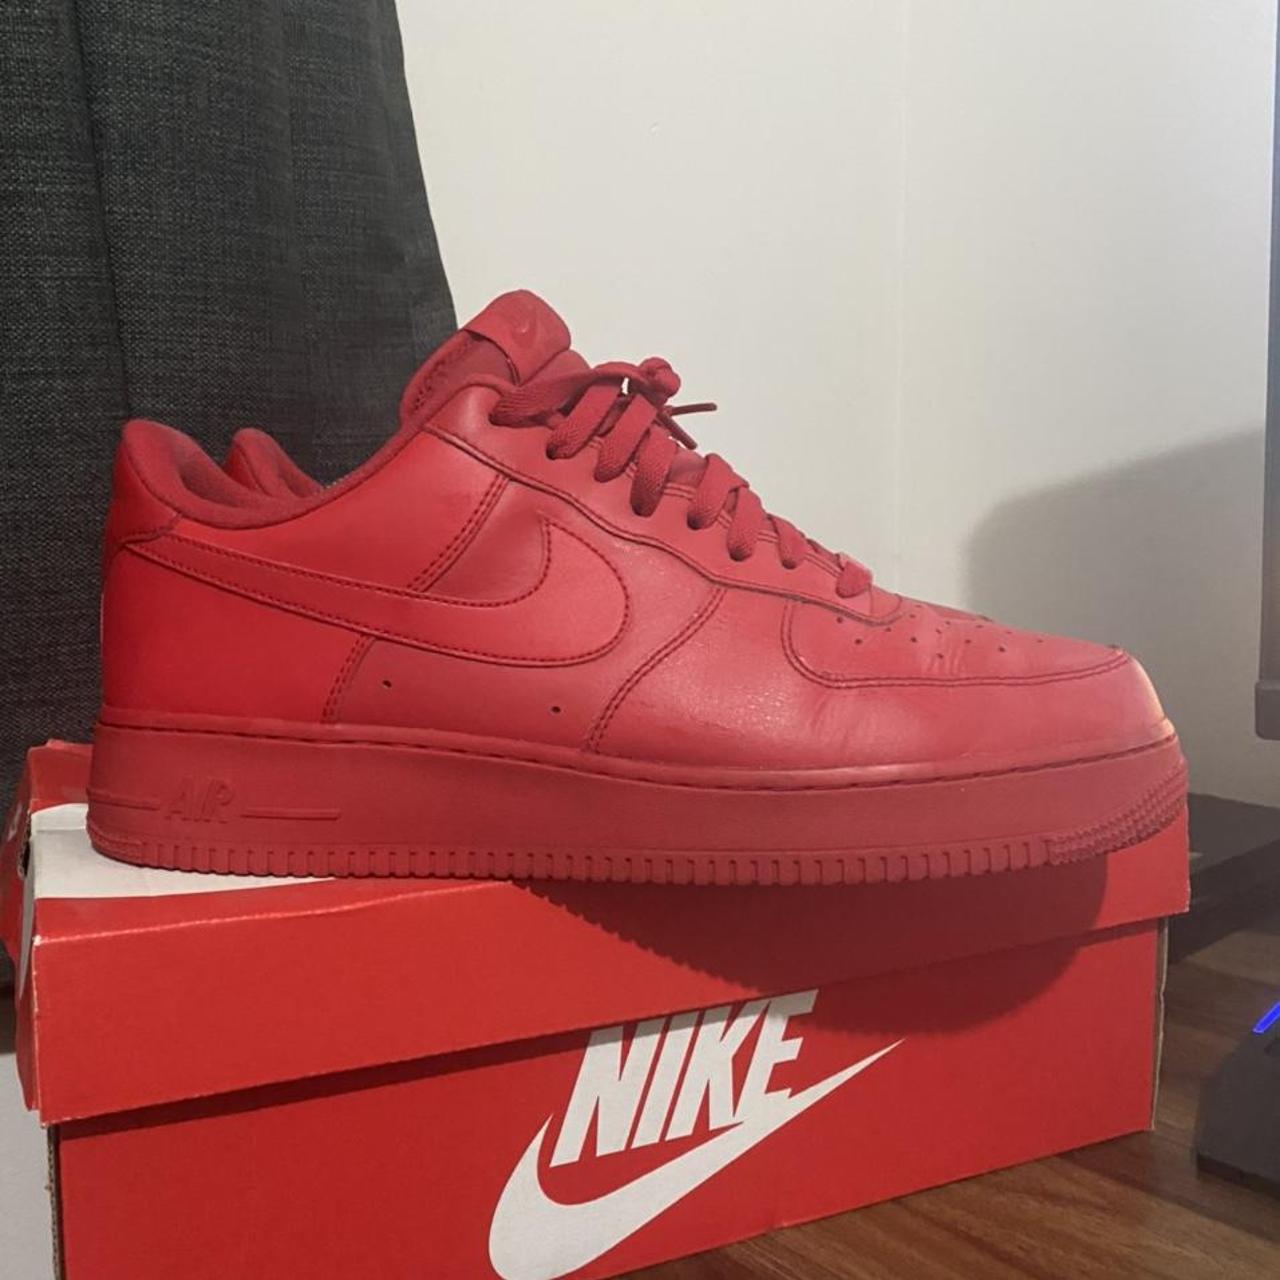 Nike Air Force 1 Low '07 LV8 1 'Triple Red' 9